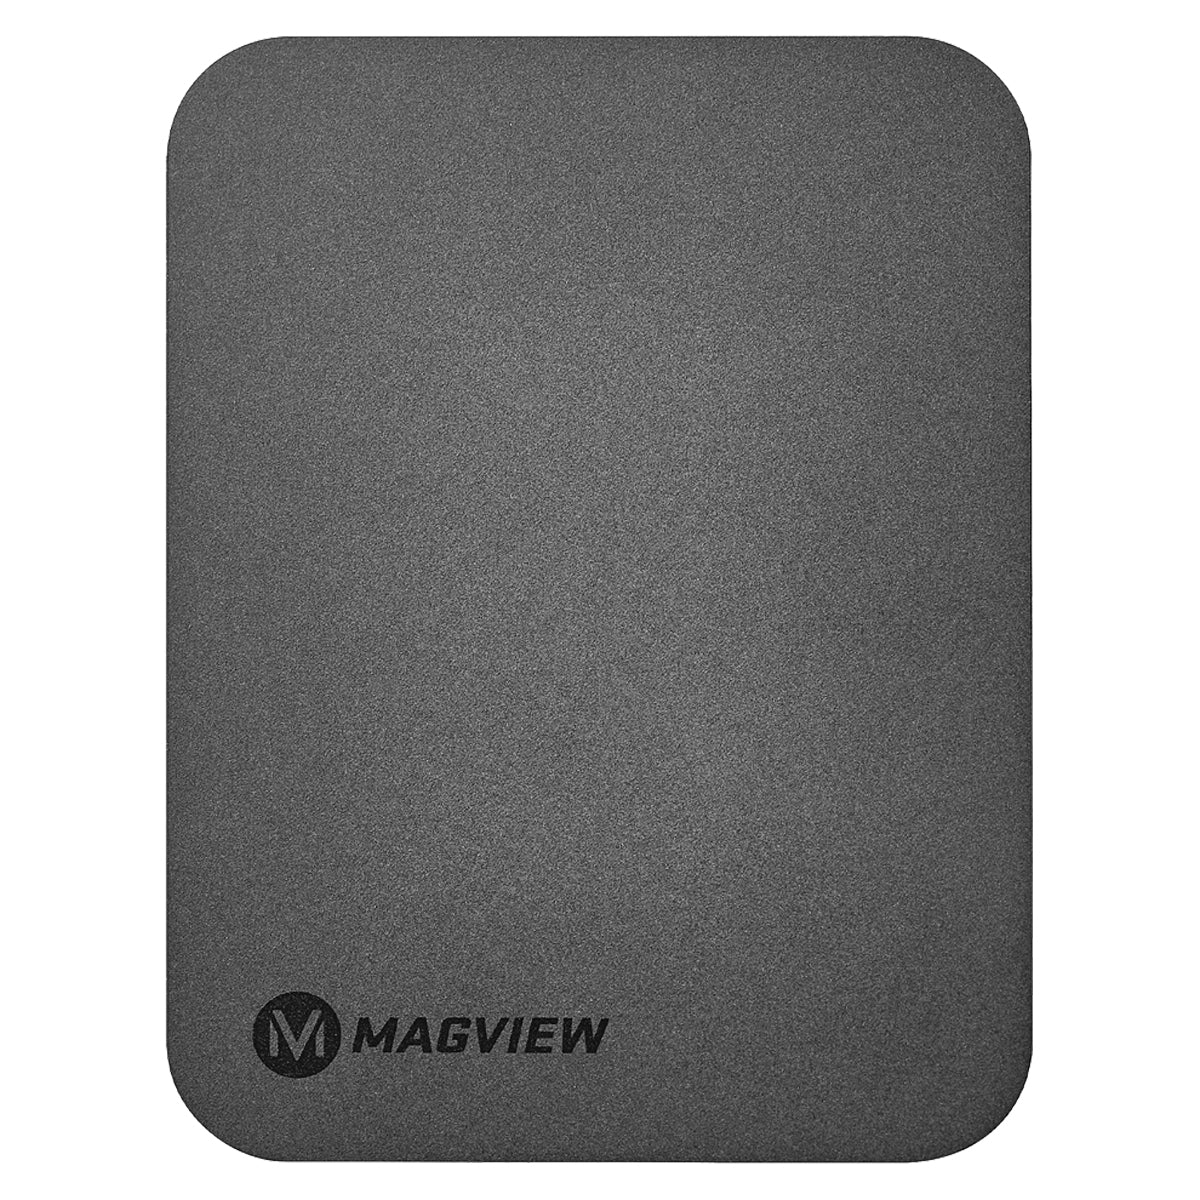 Magview Phone Plate in  by GOHUNT | Magview - GOHUNT Shop